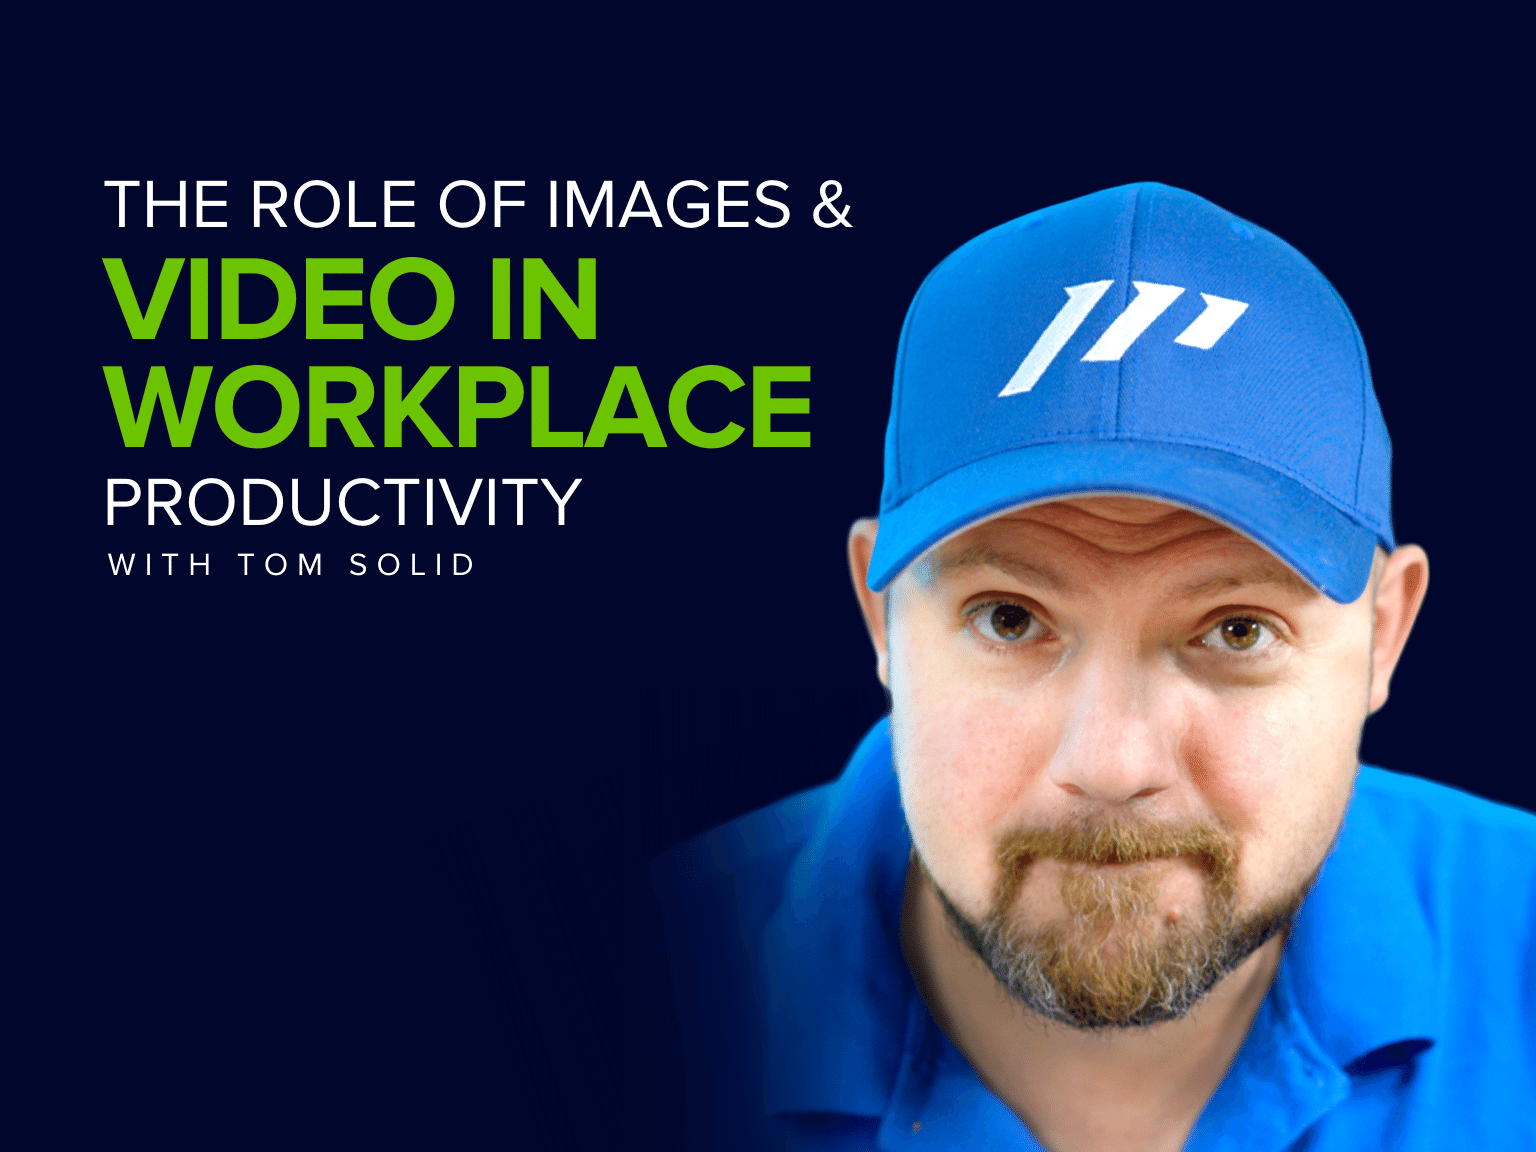 The Role of Images & Video in Workplace Productivity